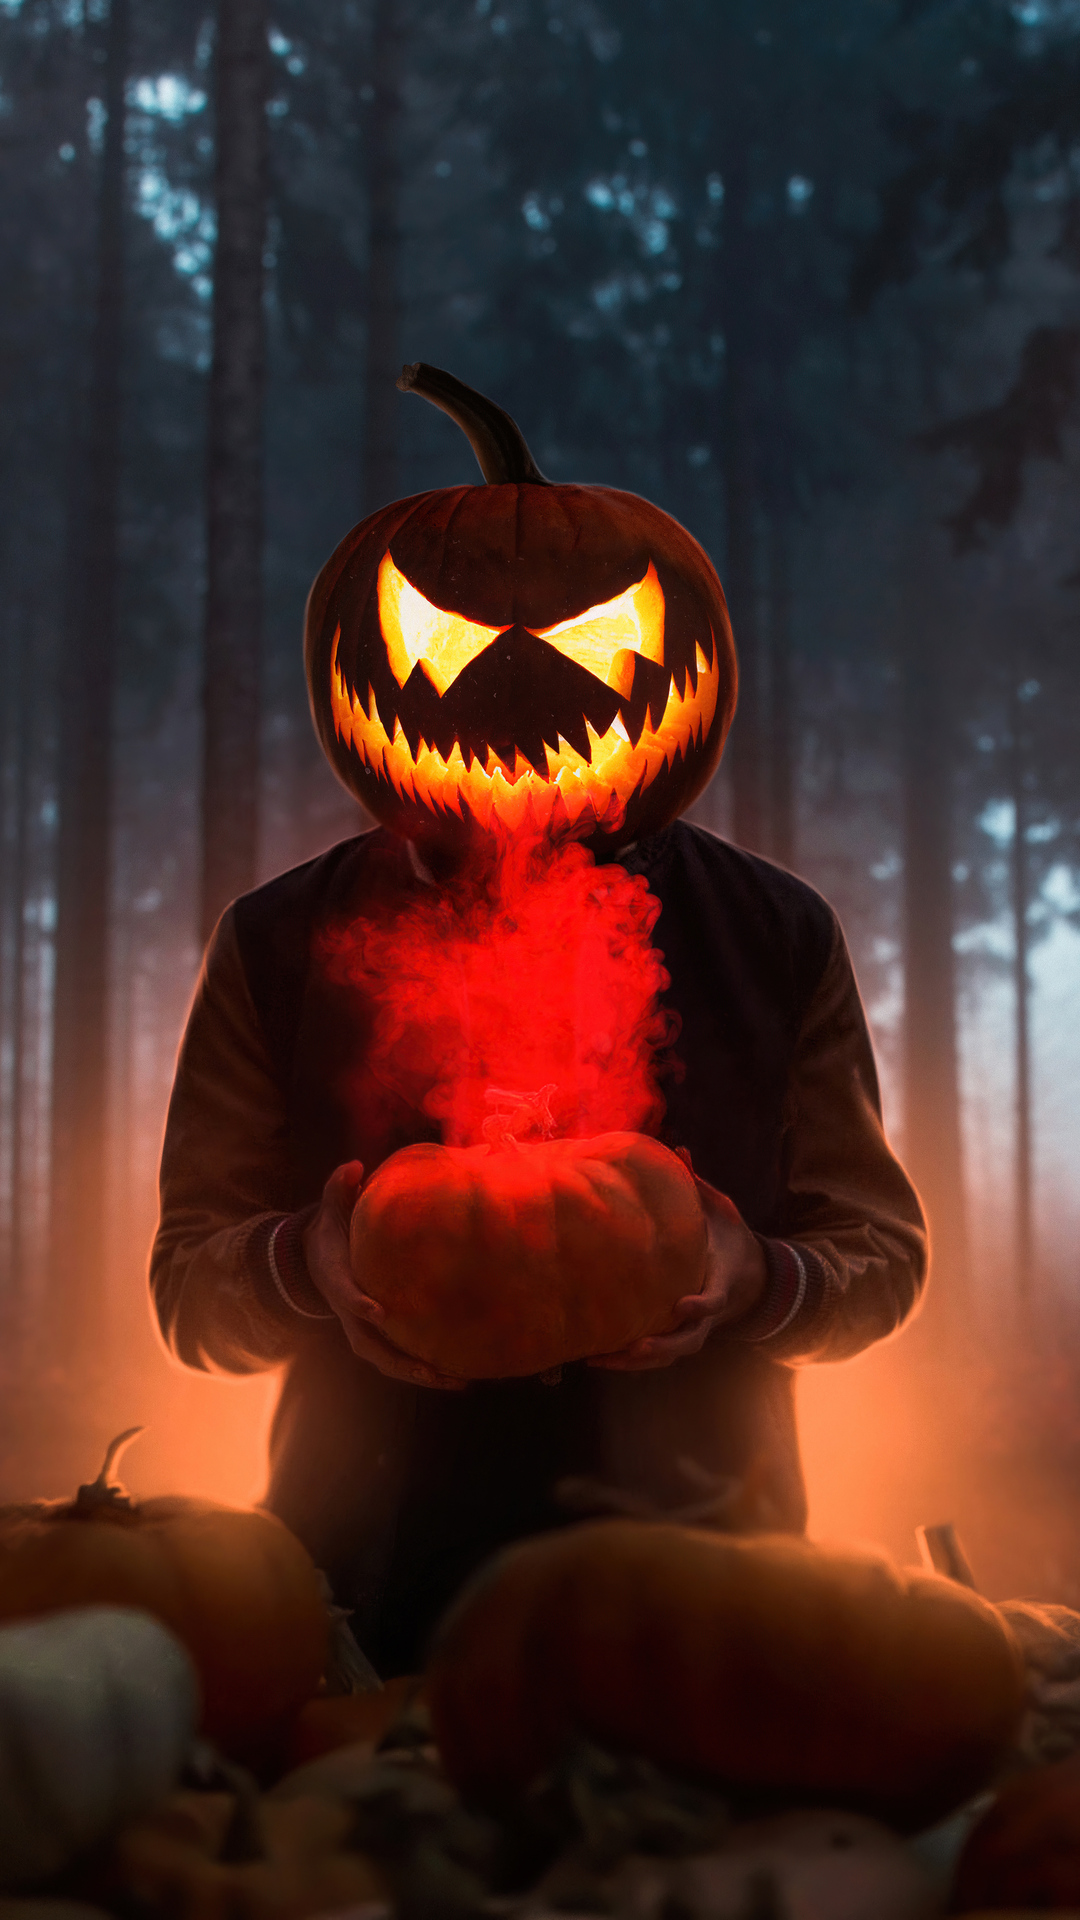 1080x1920 Halloween Glowing Mask Boy 4k Iphone 7,6s,6 Plus, Pixel xl ,One Plus 3,3t,5 HD 4k Wallpapers, Images, Backgrounds, Photos and Pictures